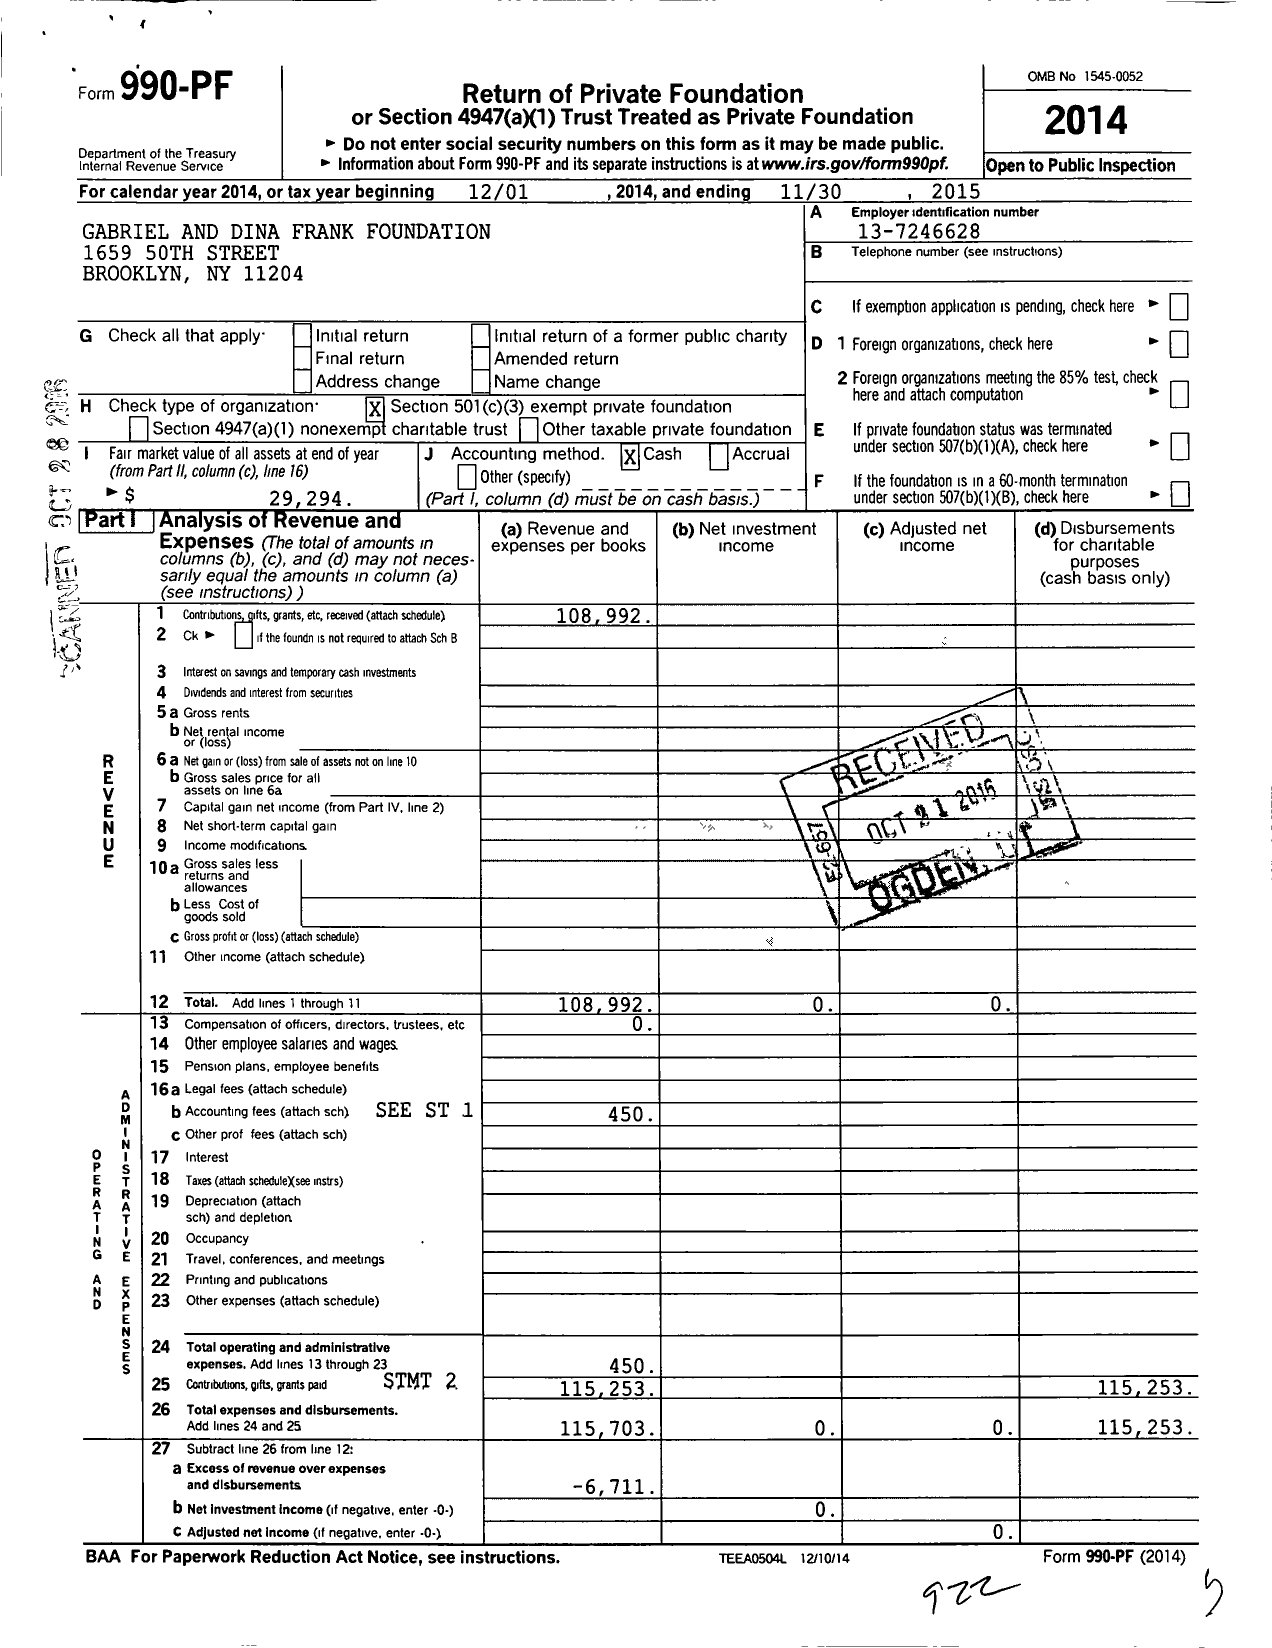 Image of first page of 2014 Form 990PF for Gabriel and Dina Frank Foundation